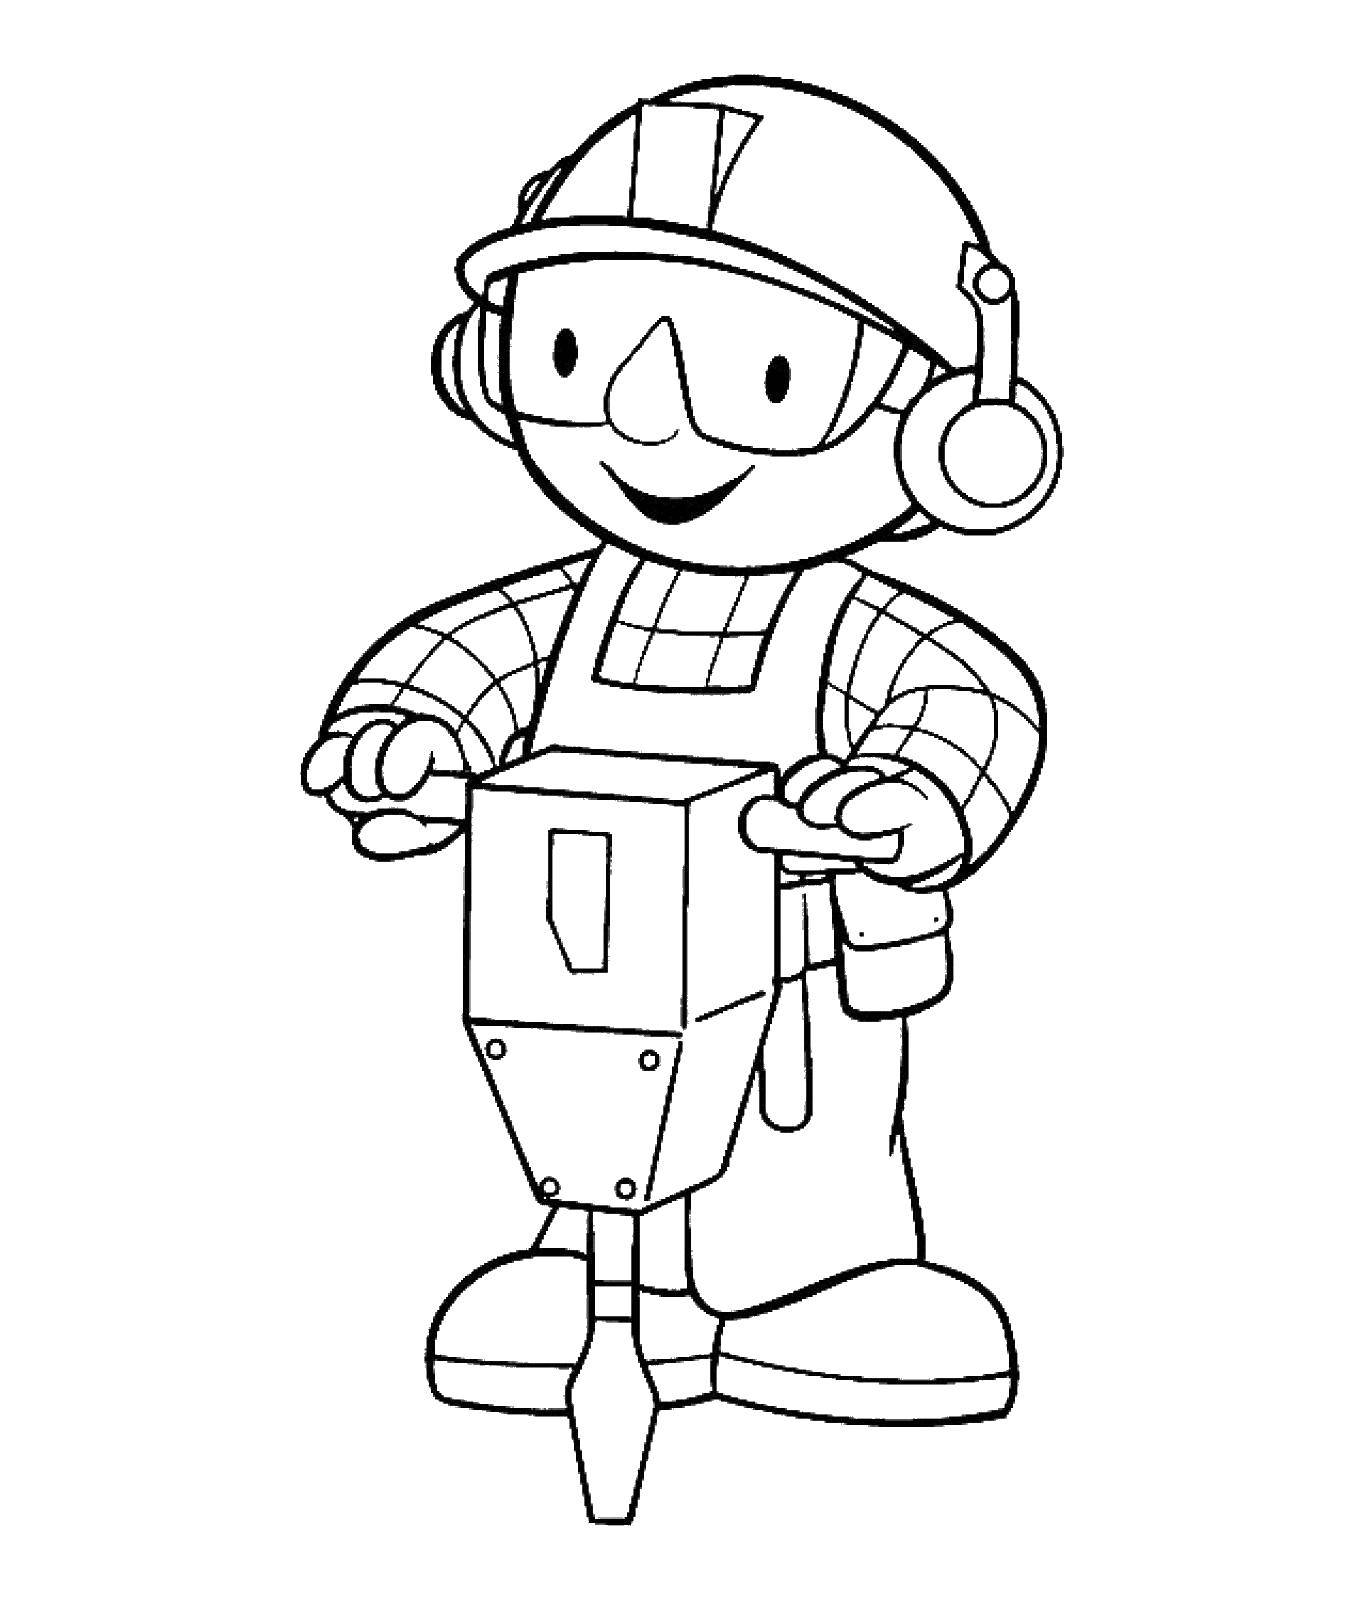 Coloring Jackhammer. Category Bob the Builder. Tags:  Builder, tools, building.